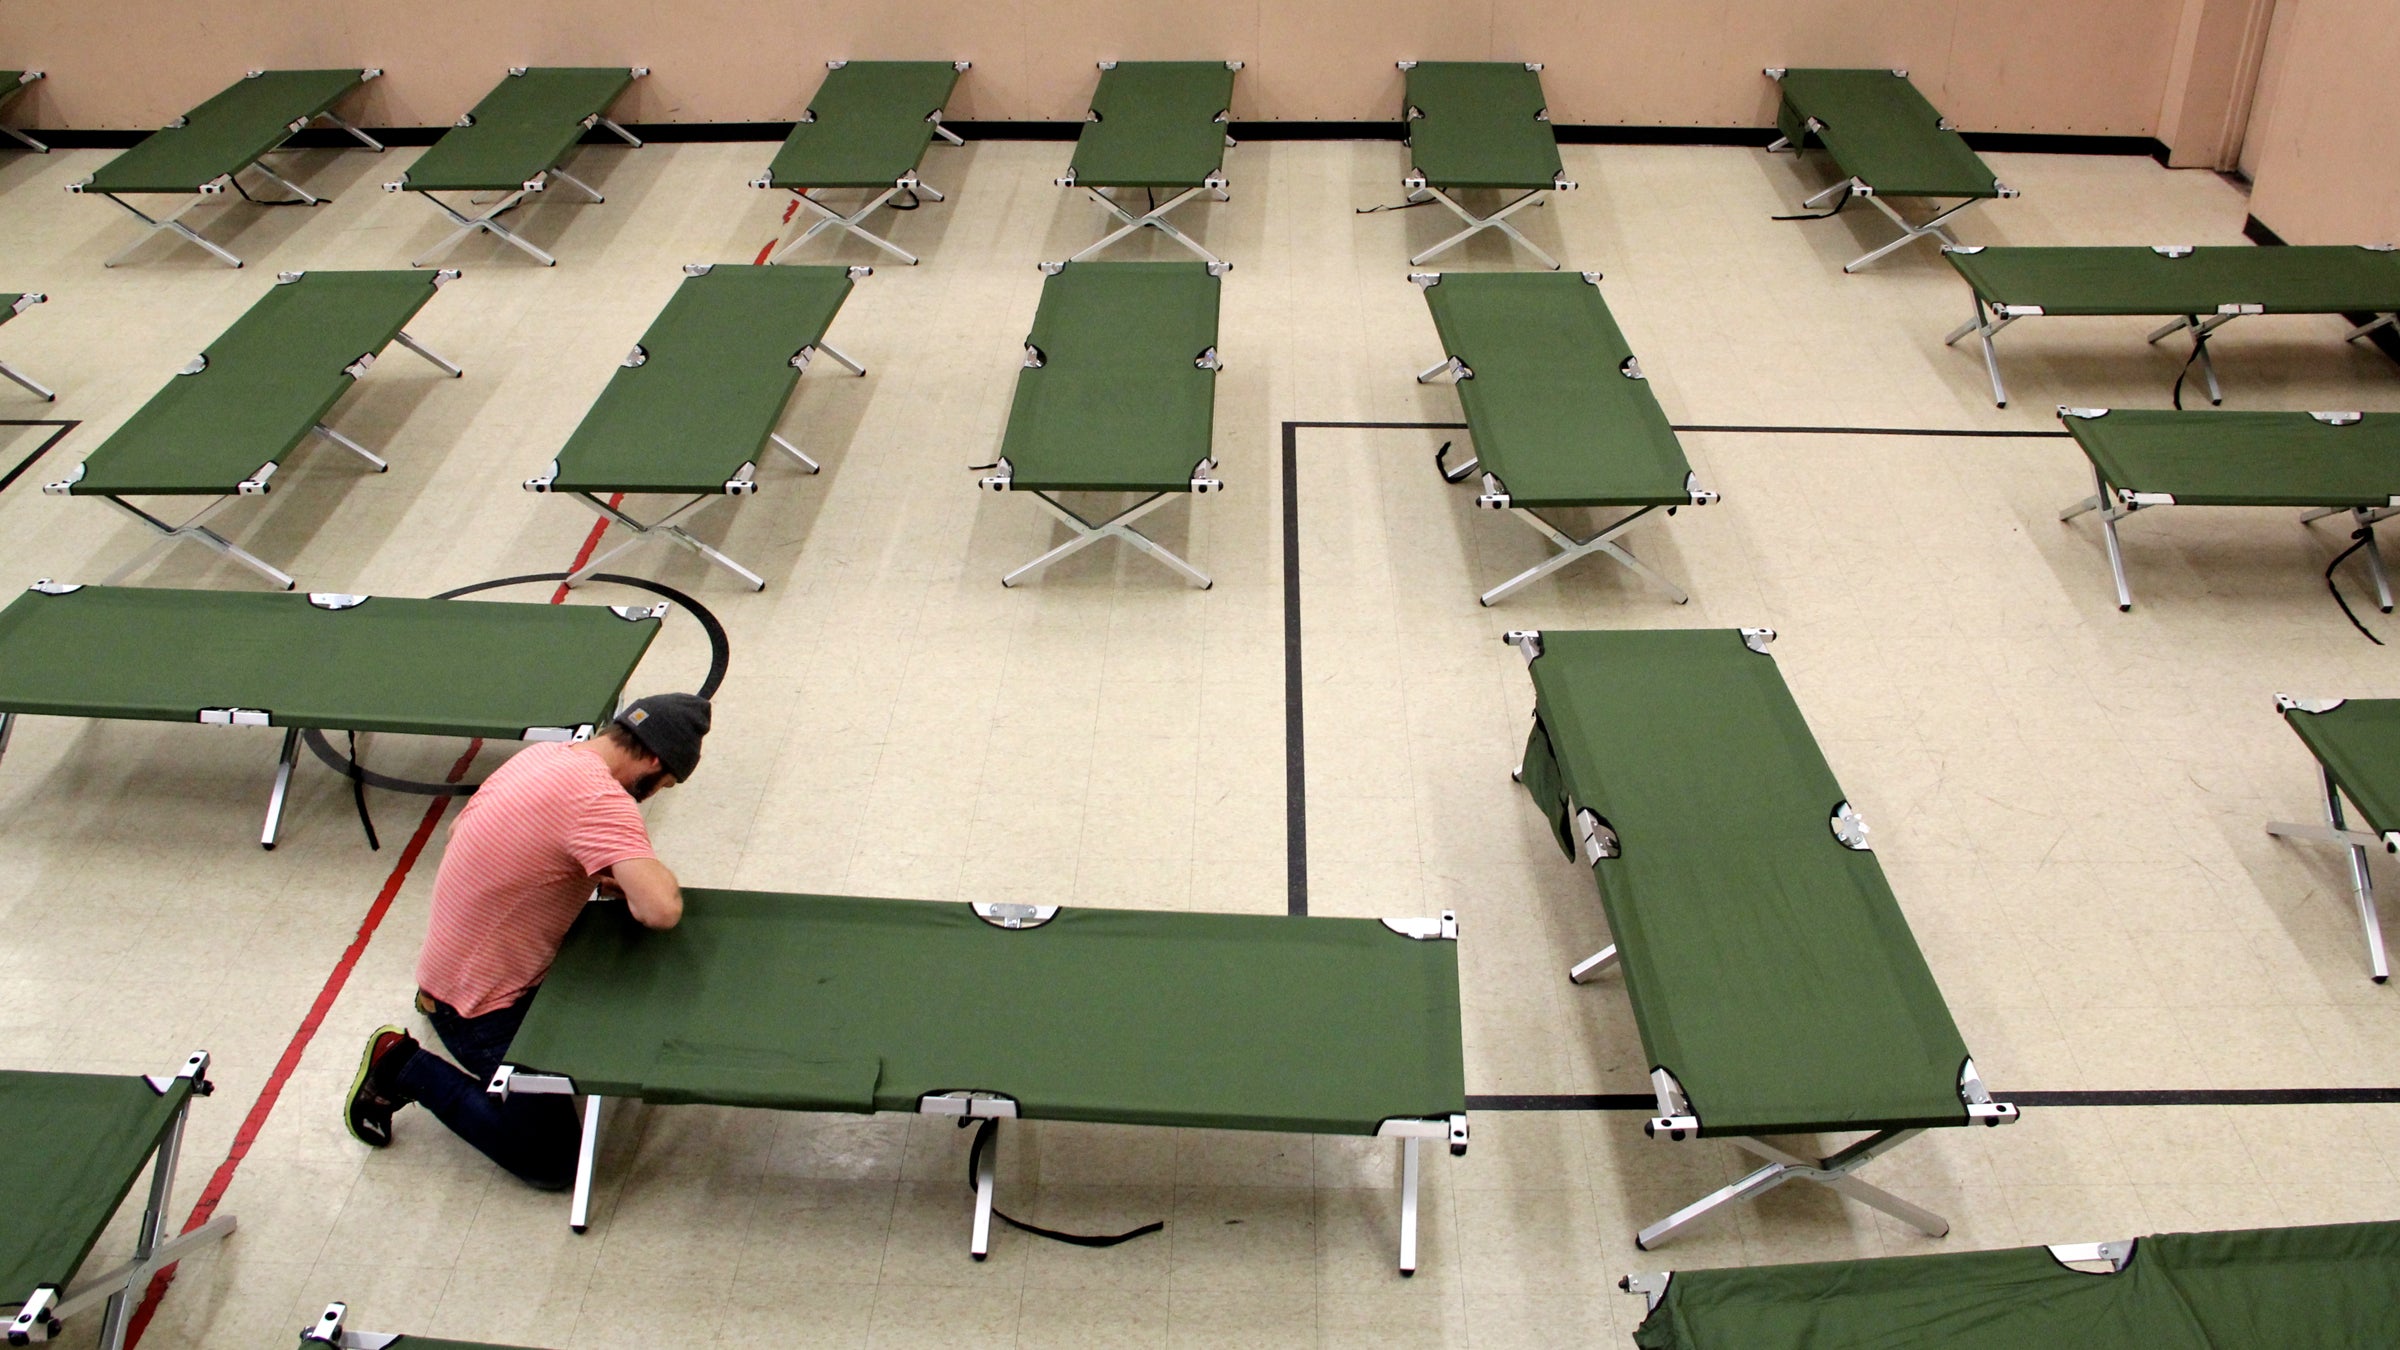  Joel Snyder, housing case manager for the Salvation Army in Norristown, sets up cots in the organization's basement gym. (Emma Lee/WHYY) 